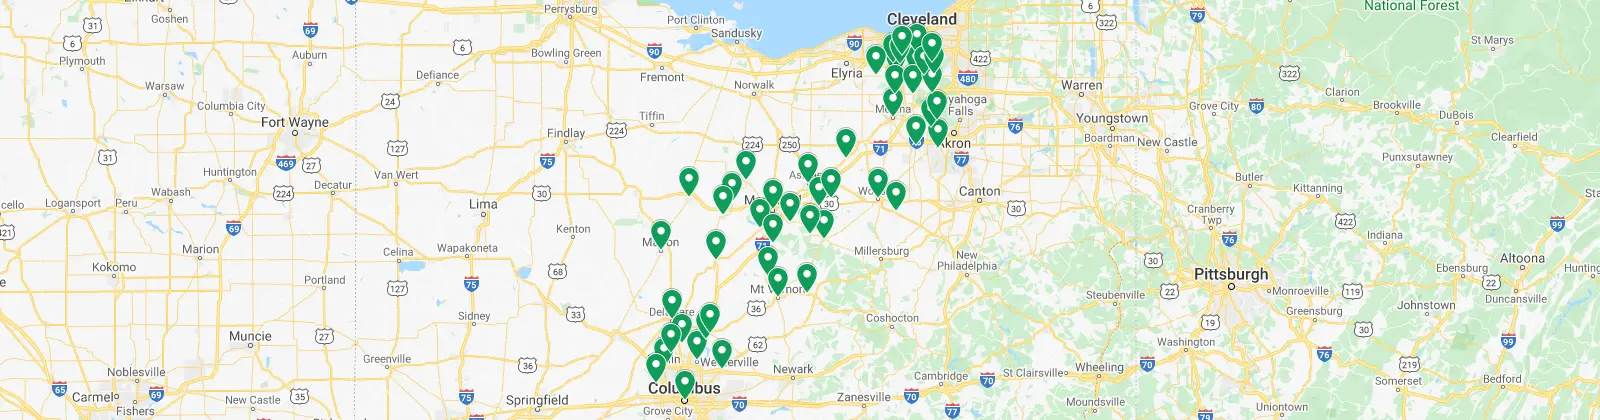 Free Spray Lawn Care service areas map graphic